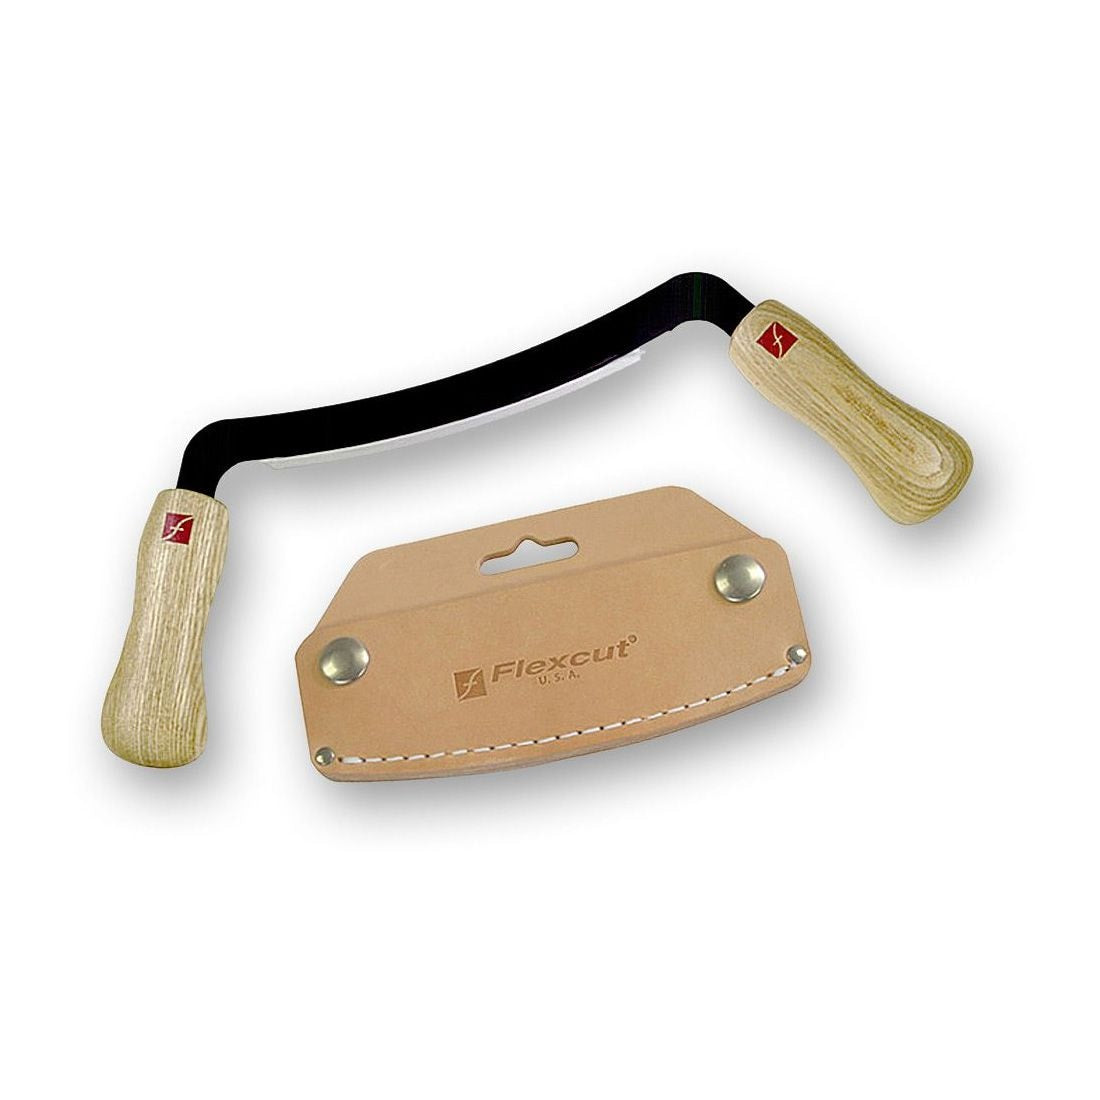 picture of the Flexcut drawknife and leather sheath. Drawknife has an overall width of 292mm and a blade width of  125mm. The leather sheath covers just the sharp blade.